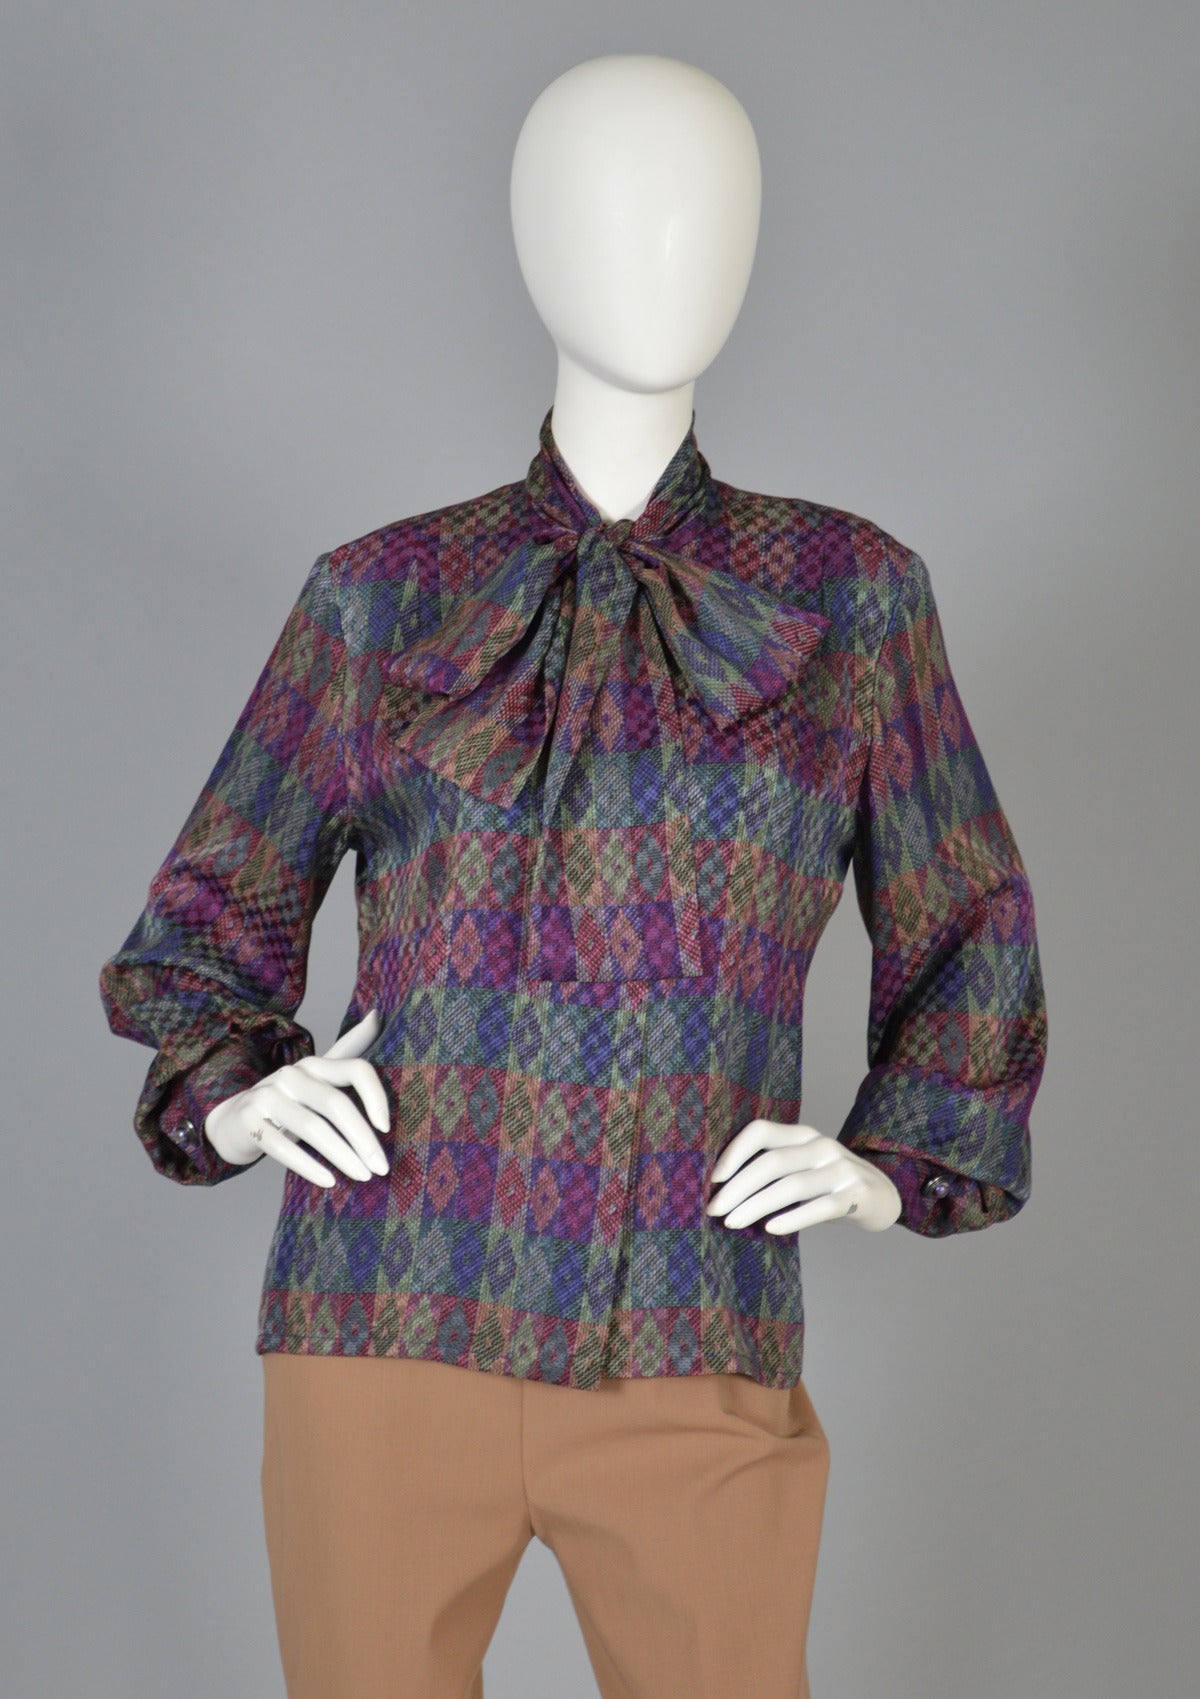 Gorgeous late 1970s/early 80s graphic silk blouse by Givenchy. Fantastic piece with the most amazing pattern! Incredible diamond pattern looks basket woven but isn't - such an incredible textile! Puffed sleeves, hidden buttons up the front and